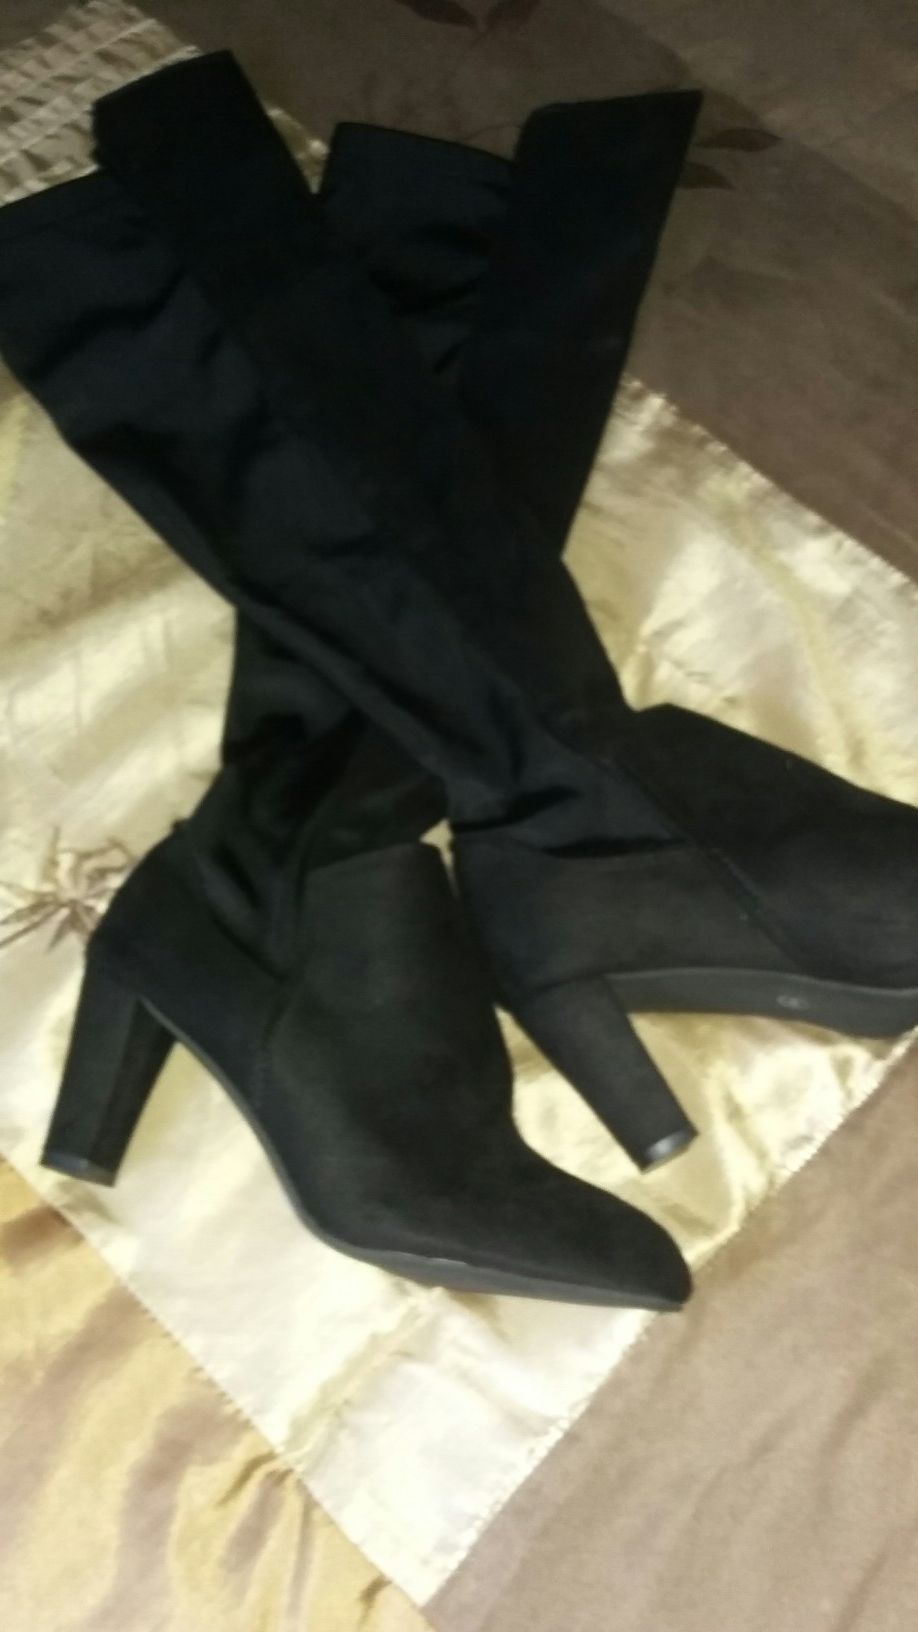 Brand new thigh-high boot size 9